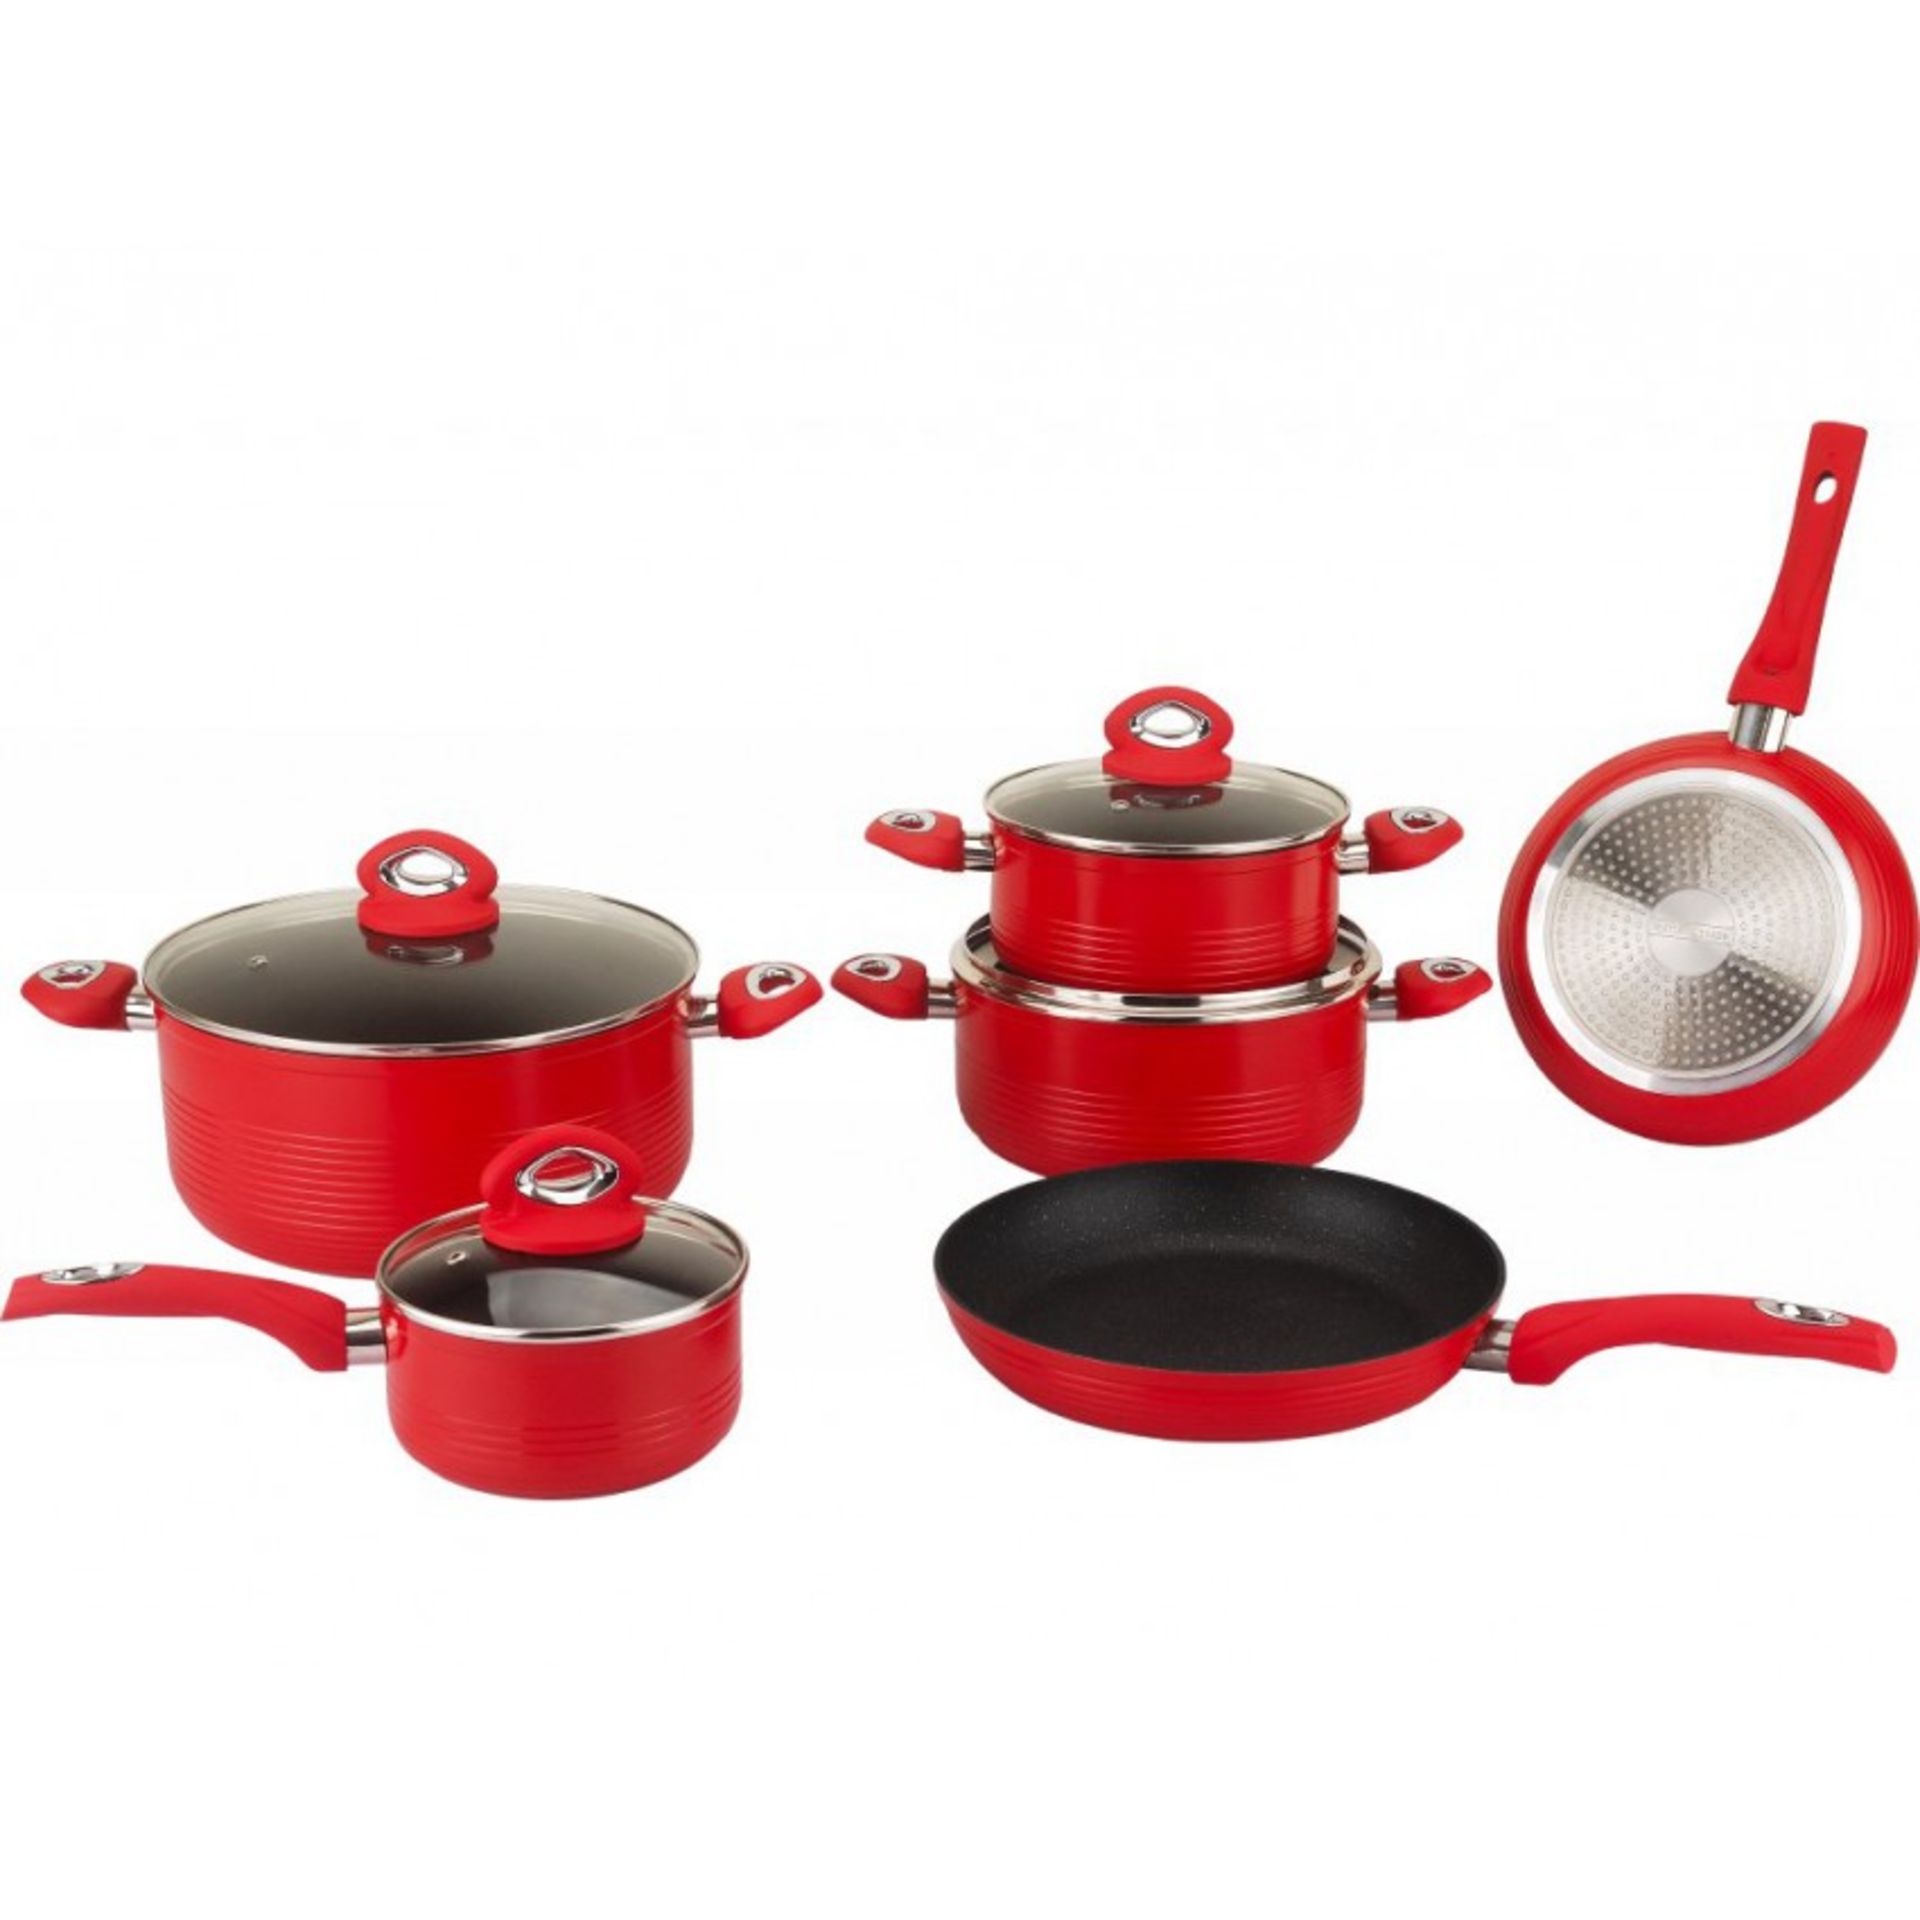 V *TRADE QTY* Brand New Ten Piece Forged Marble Saucepan Set Including Two Frying Pans-Stock Pots